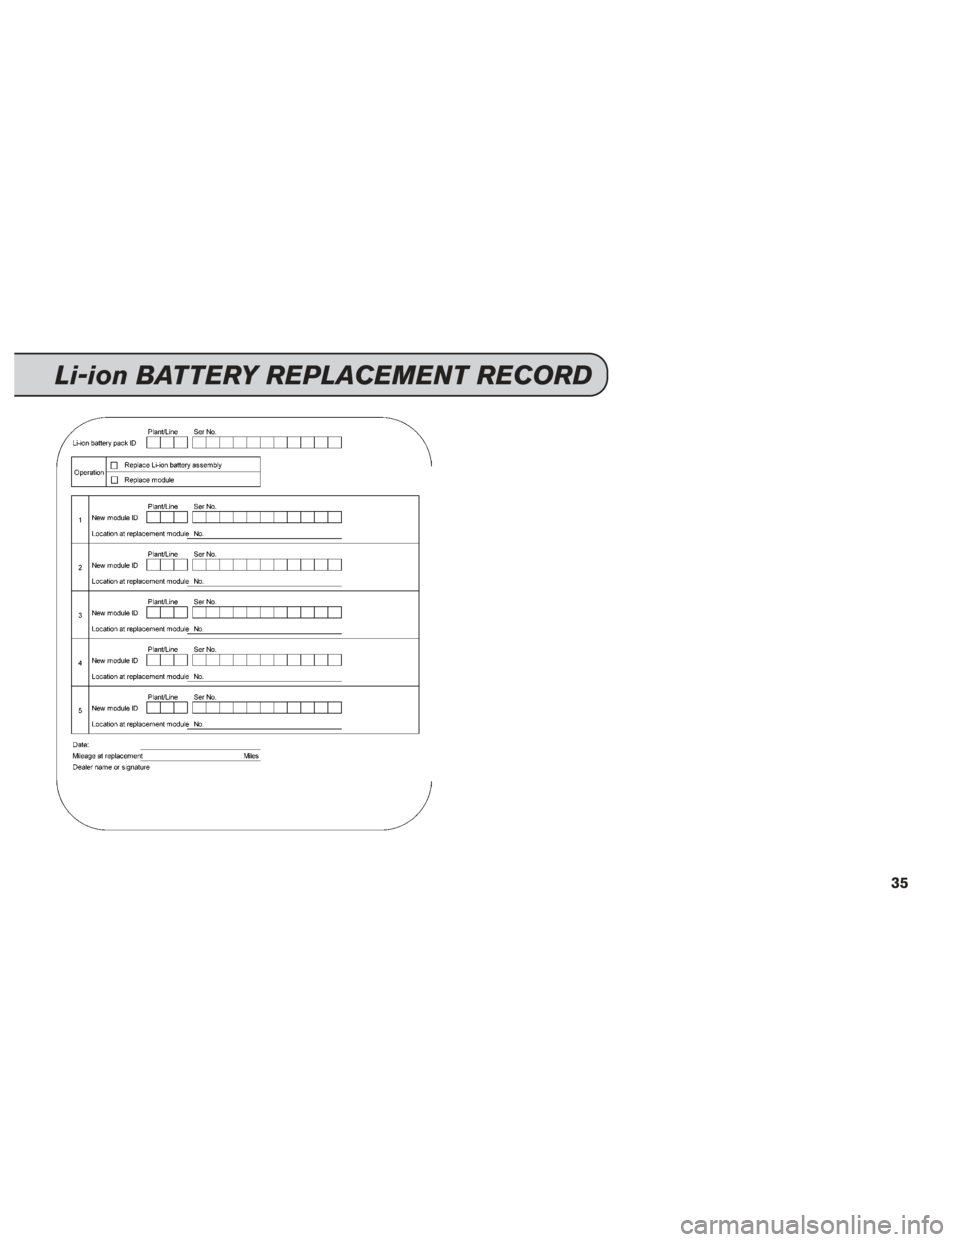 NISSAN LEAF 2013 1.G Service And Maintenance Guide Li-ion BATTERY REPLACEMENT RECORD
35 